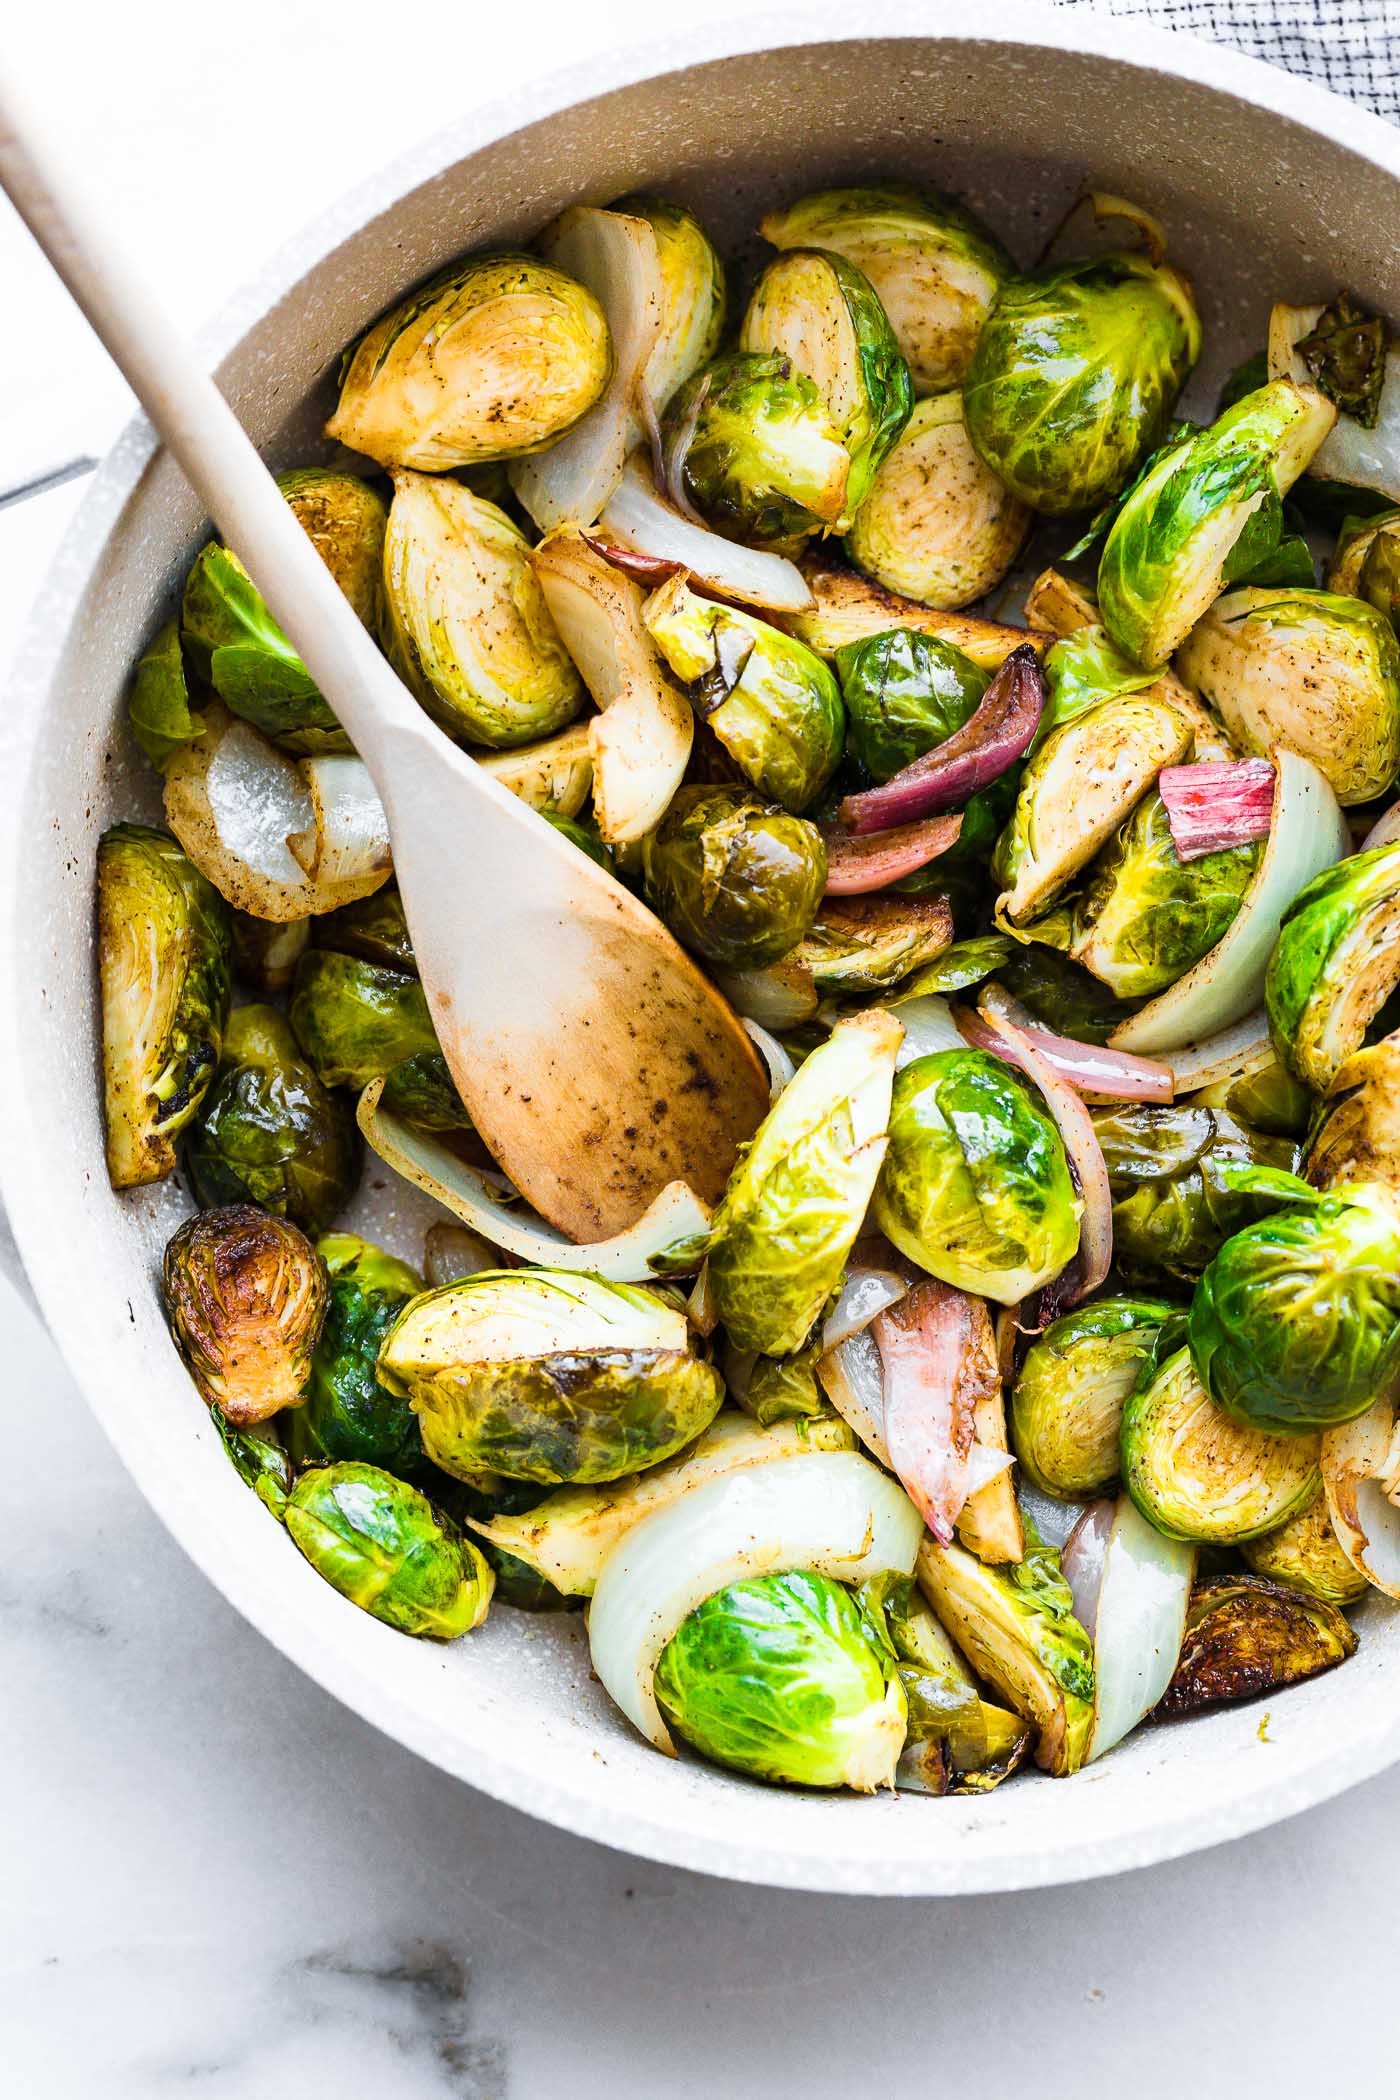 Creamy Mustard sauteed Brussel Sprouts Salad! A Brussel Sprouts superfood salad tossed in a vegan creamy mustard sauce. An easy to make paleo side dish!